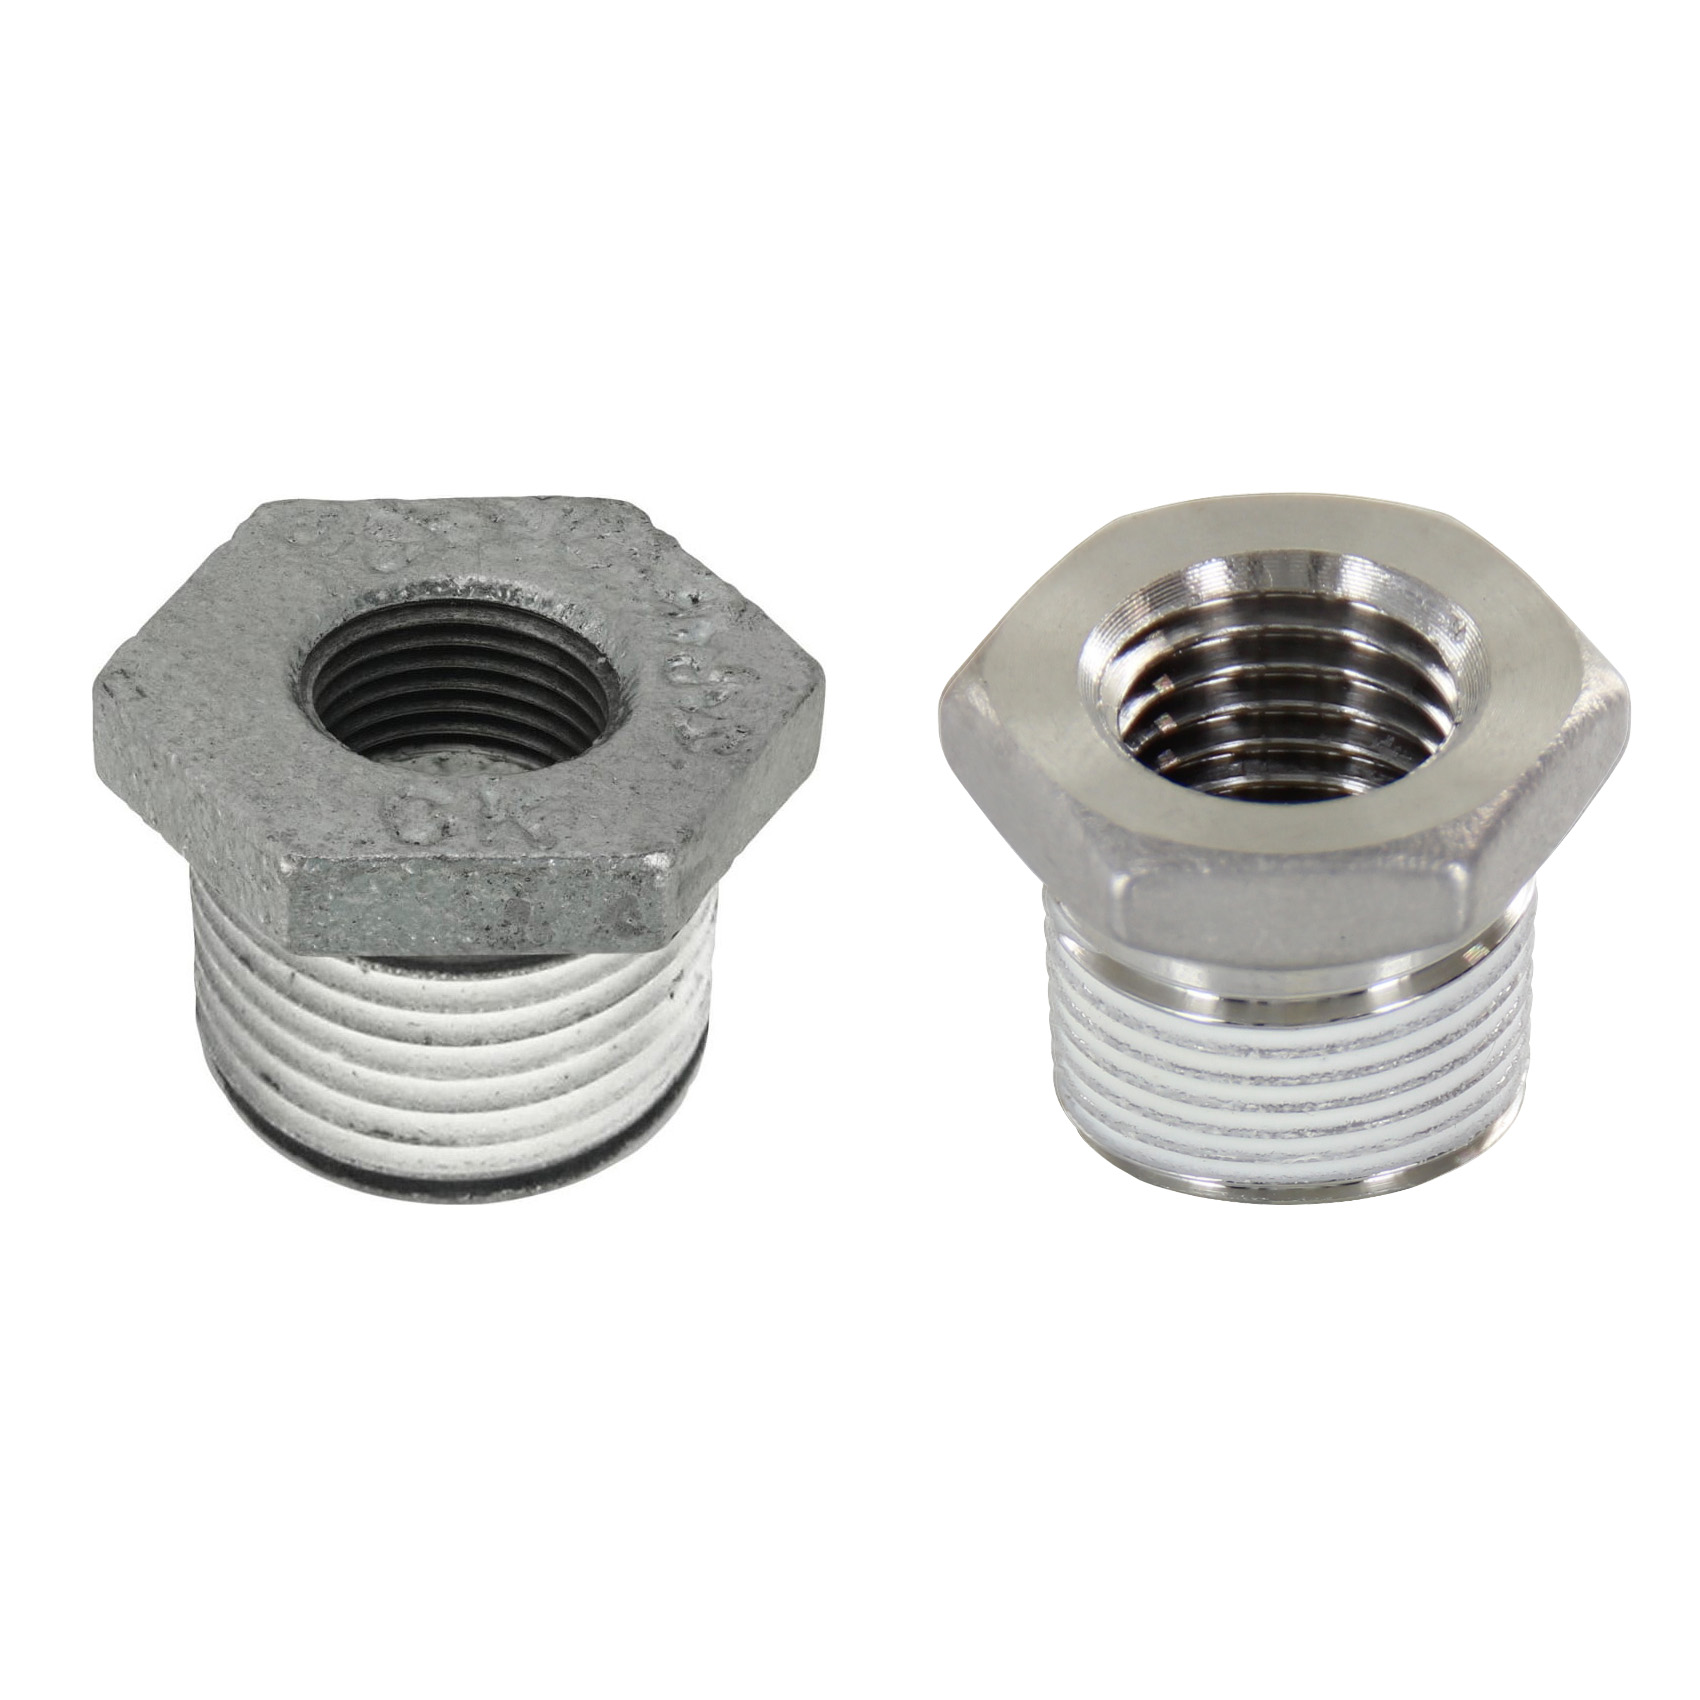 Low Pressure Fittings / With Seal Coating / Bushing SGCPB34